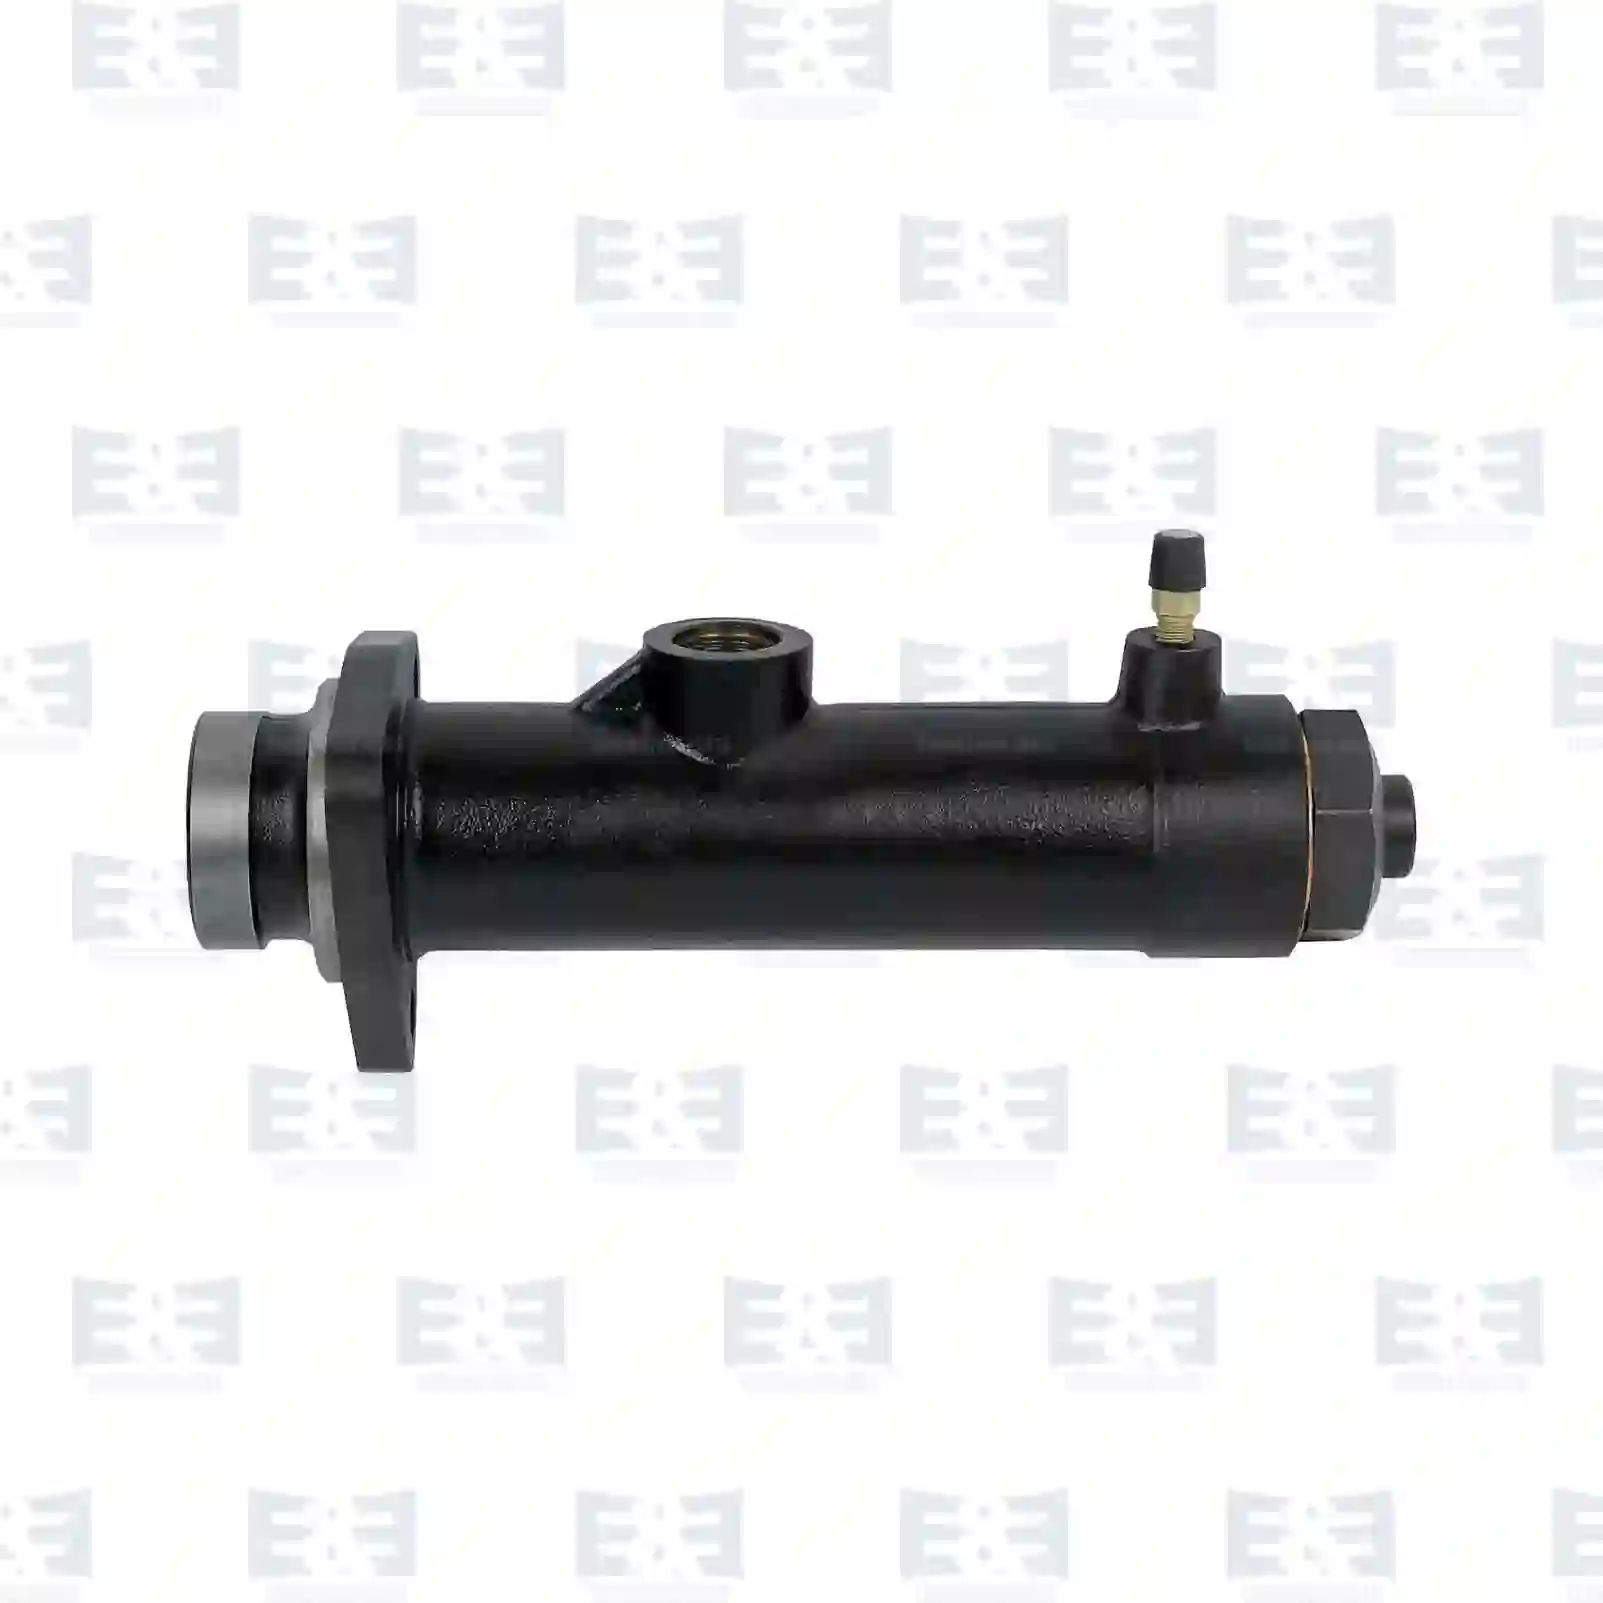 Brake Cylinders Brake master cylinder, EE No 2E2297413 ,  oem no:2468167KZ5082-28, 1619314, 04457816, 1085201, X860085201000, 04457816, 002411502, 90810818115, 0024301401, 0024302201, 0024302601, 0024304101, 002430410164, 0024308001, 0024308501, 0024309201, 0034304101, 0034304601, 011013270, 8282192000, 8282192100, 8282192200, ZG50283-0008 E&E Truck Spare Parts | Truck Spare Parts, Auotomotive Spare Parts